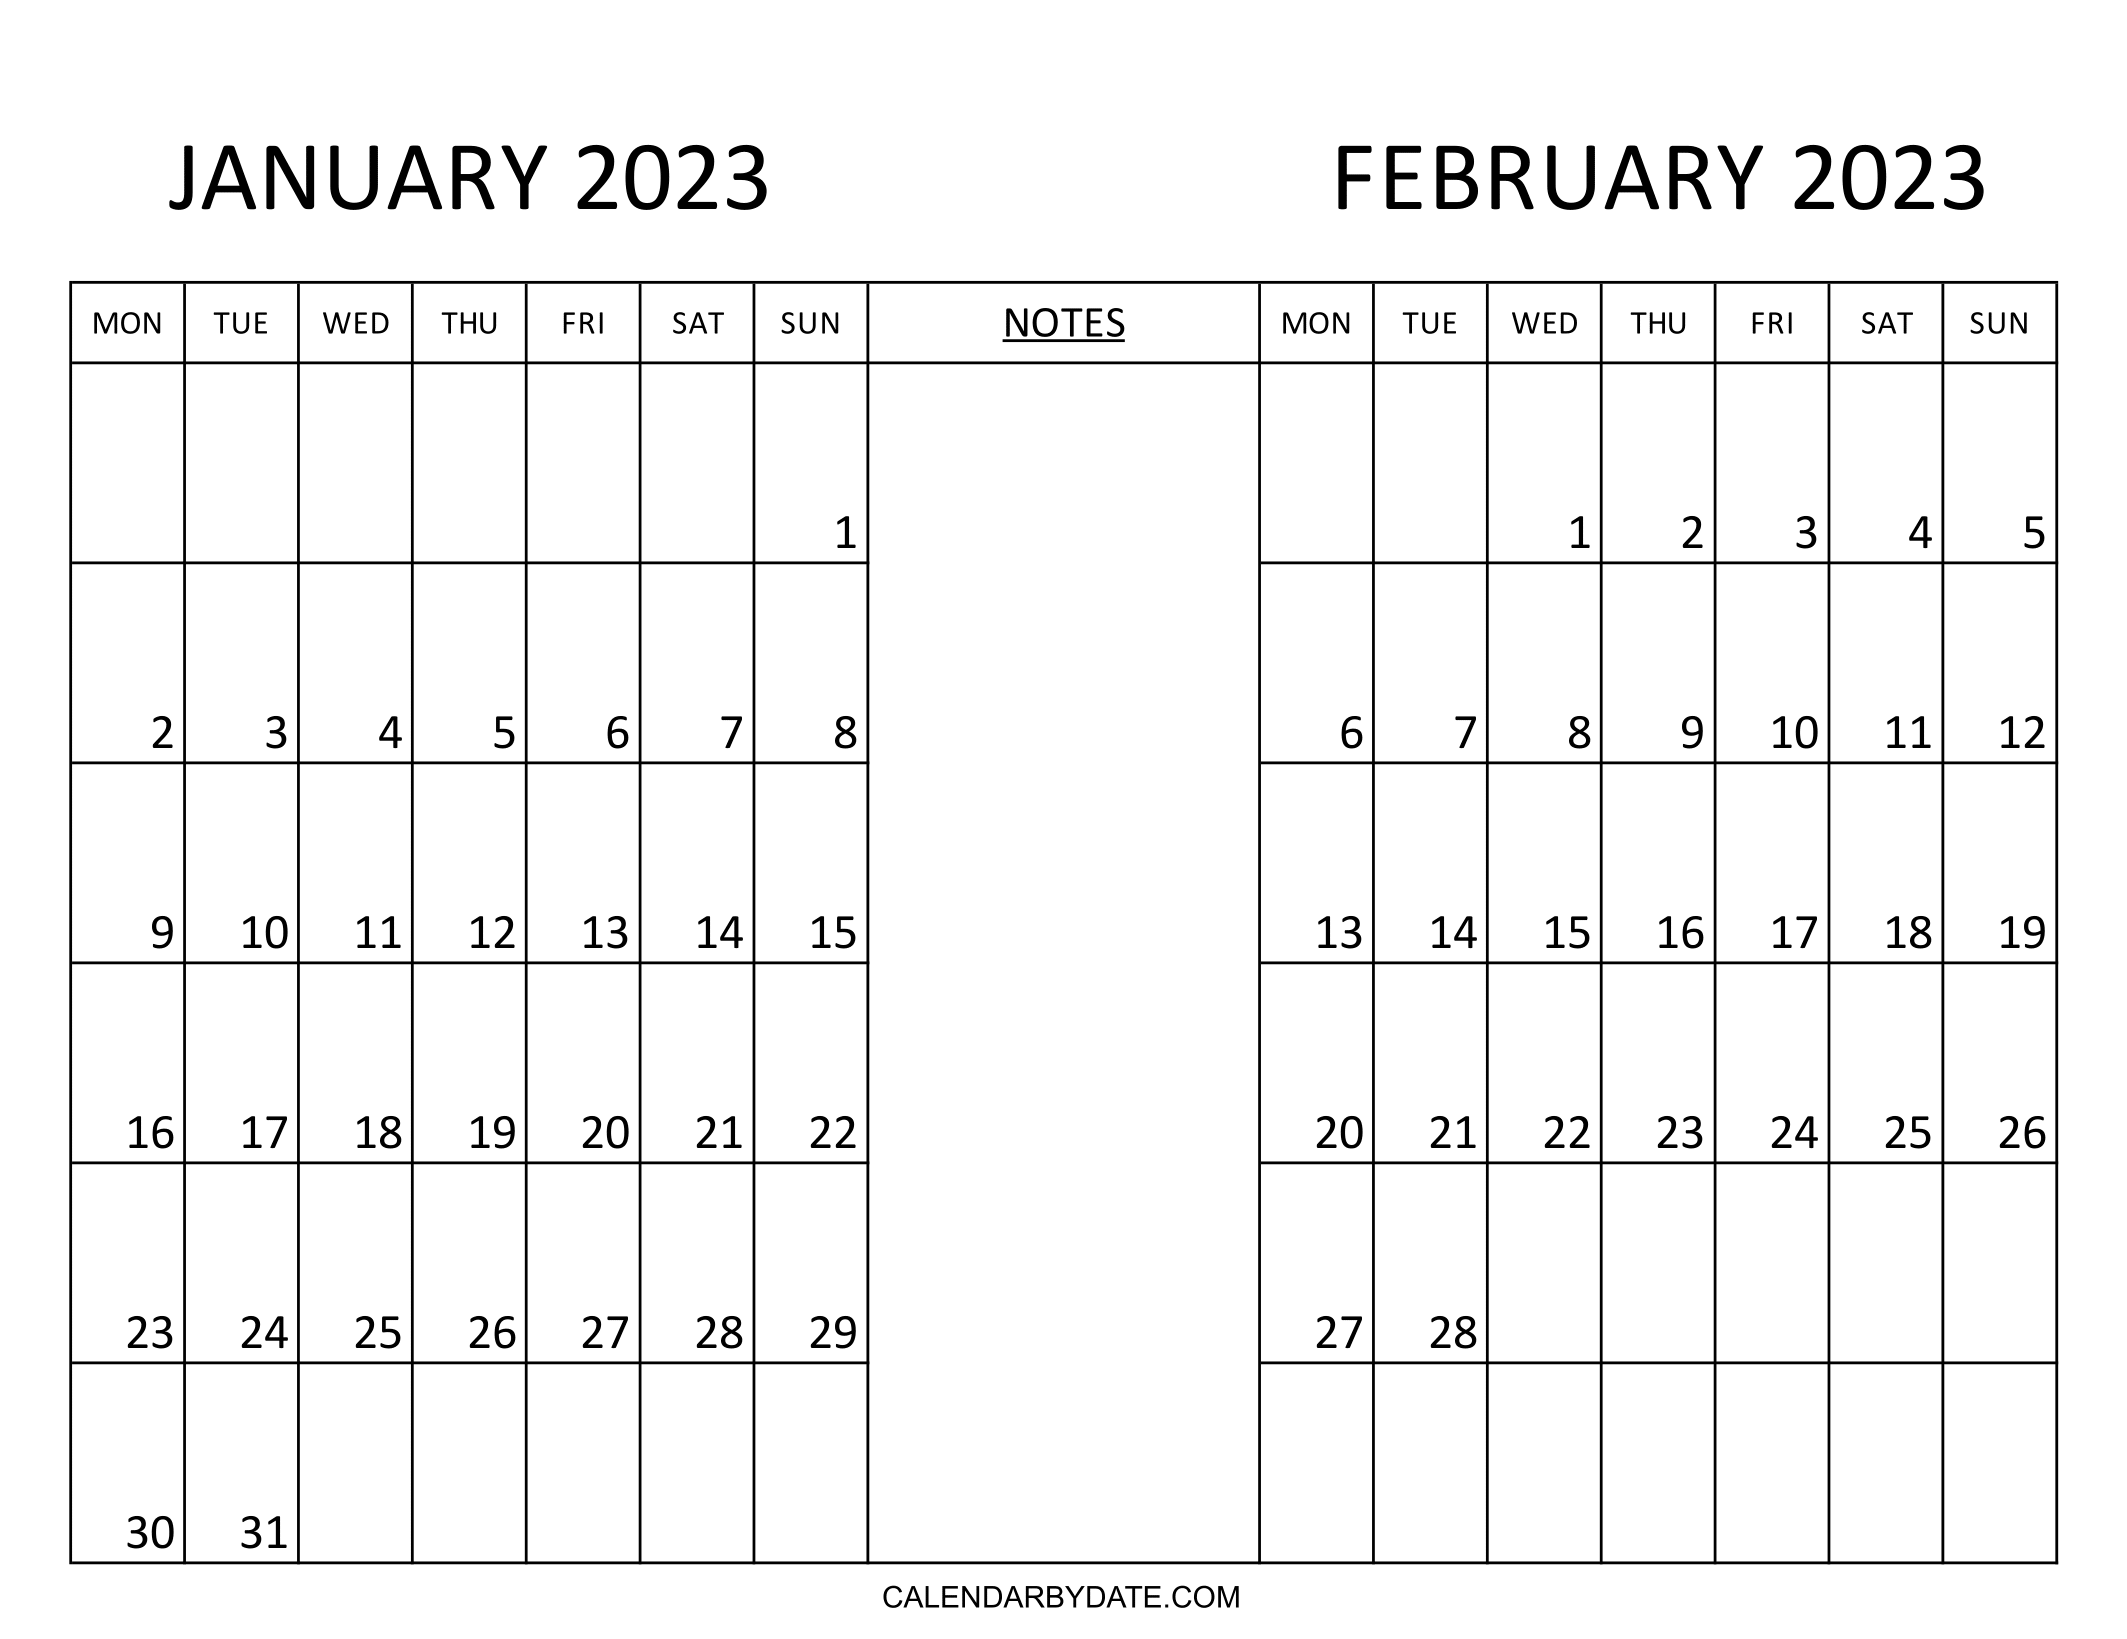 January and February 2023 calendar template is designed with bold monthly dates in the grid.